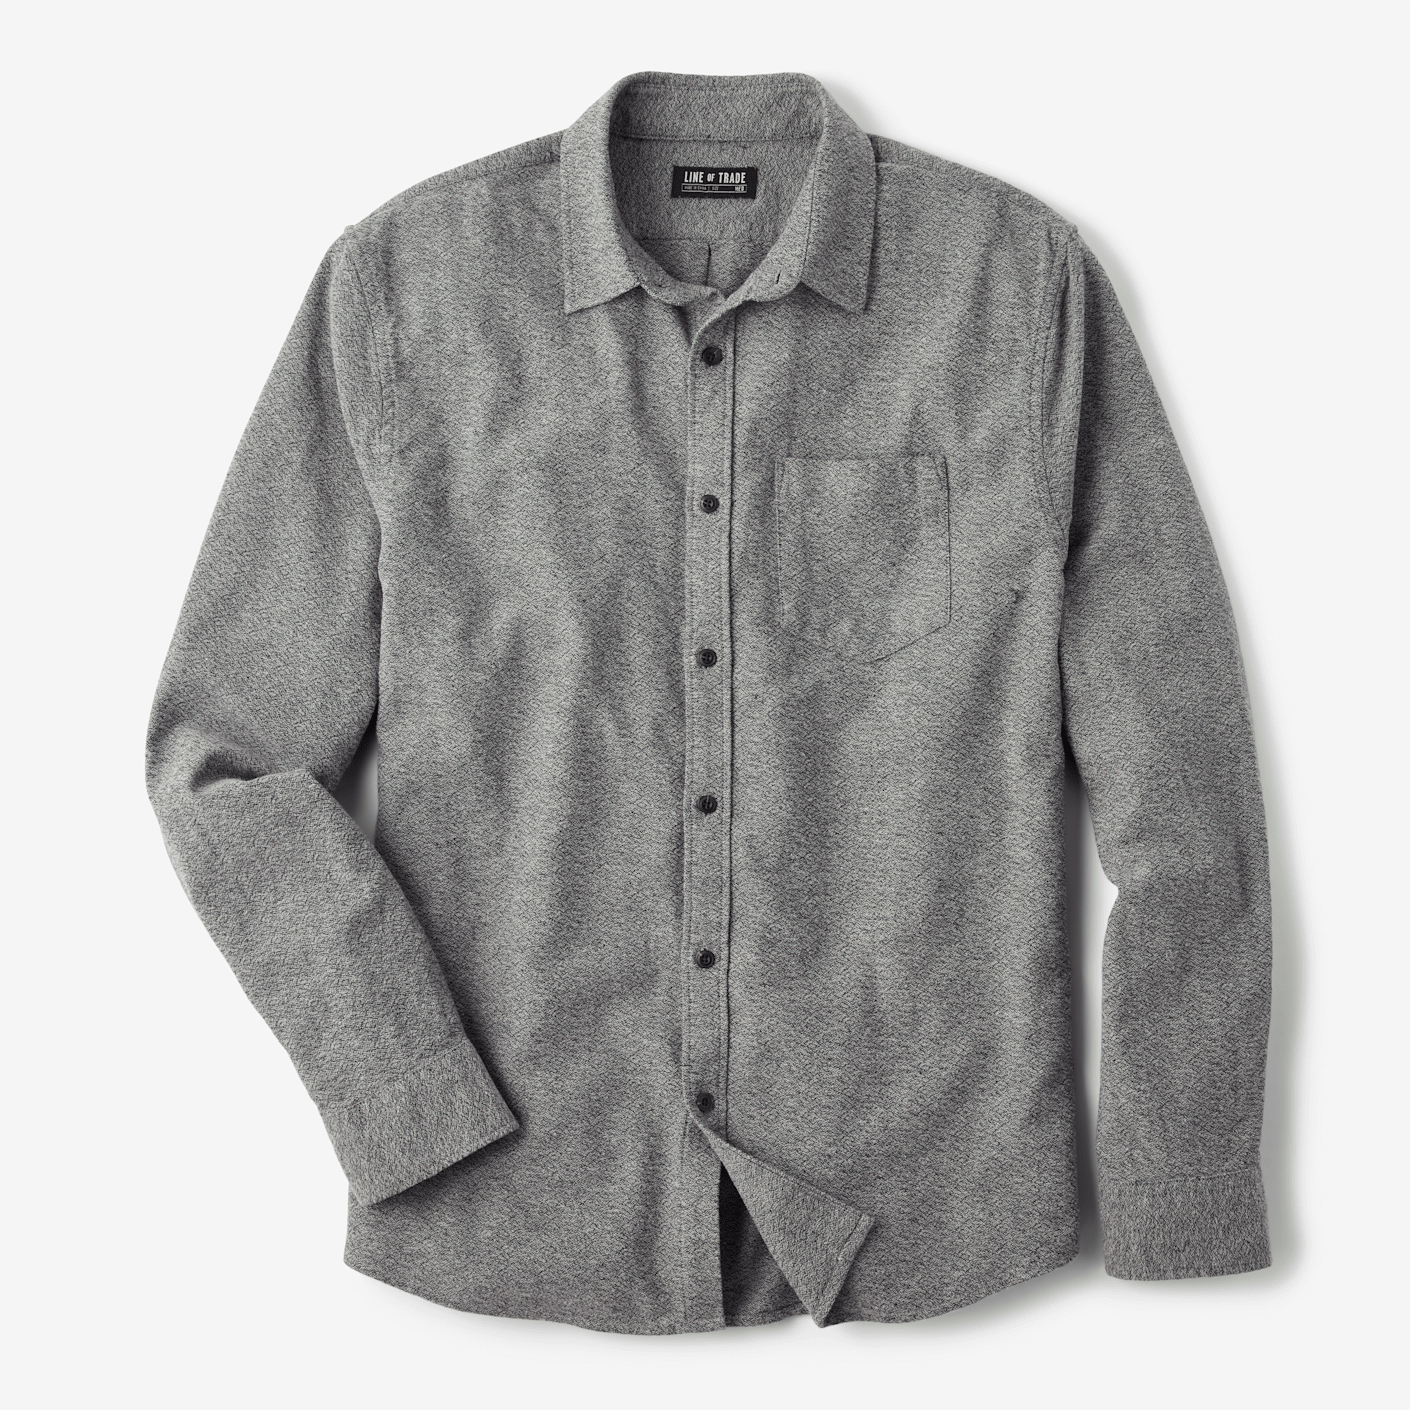 The Thursday Buy: This Bespoke Post Flannel Shirt is An Everyday Winter ...